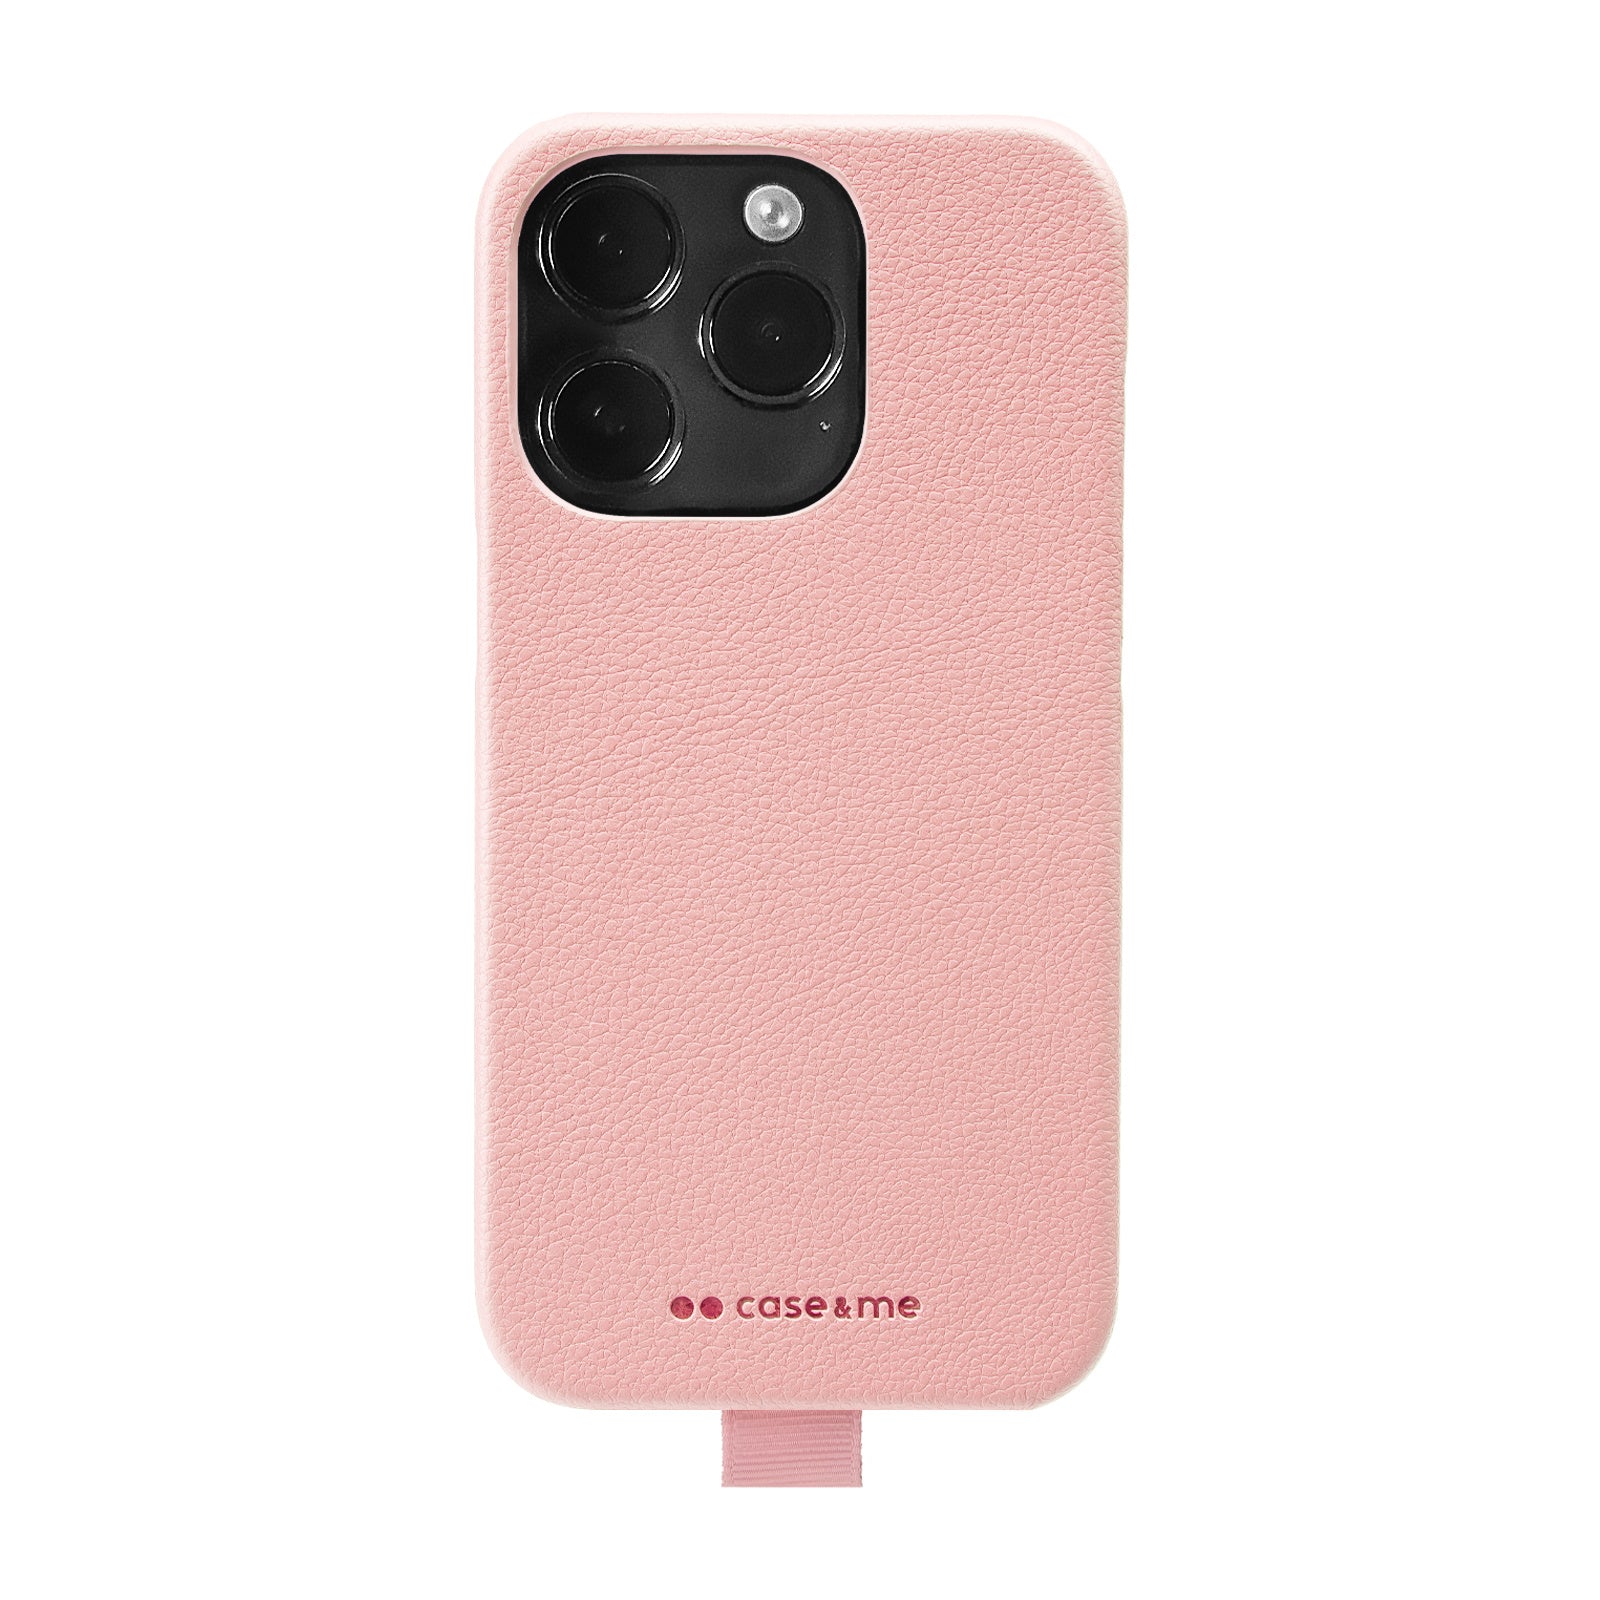 Collections of iphone and mobile phone accessories | case&me